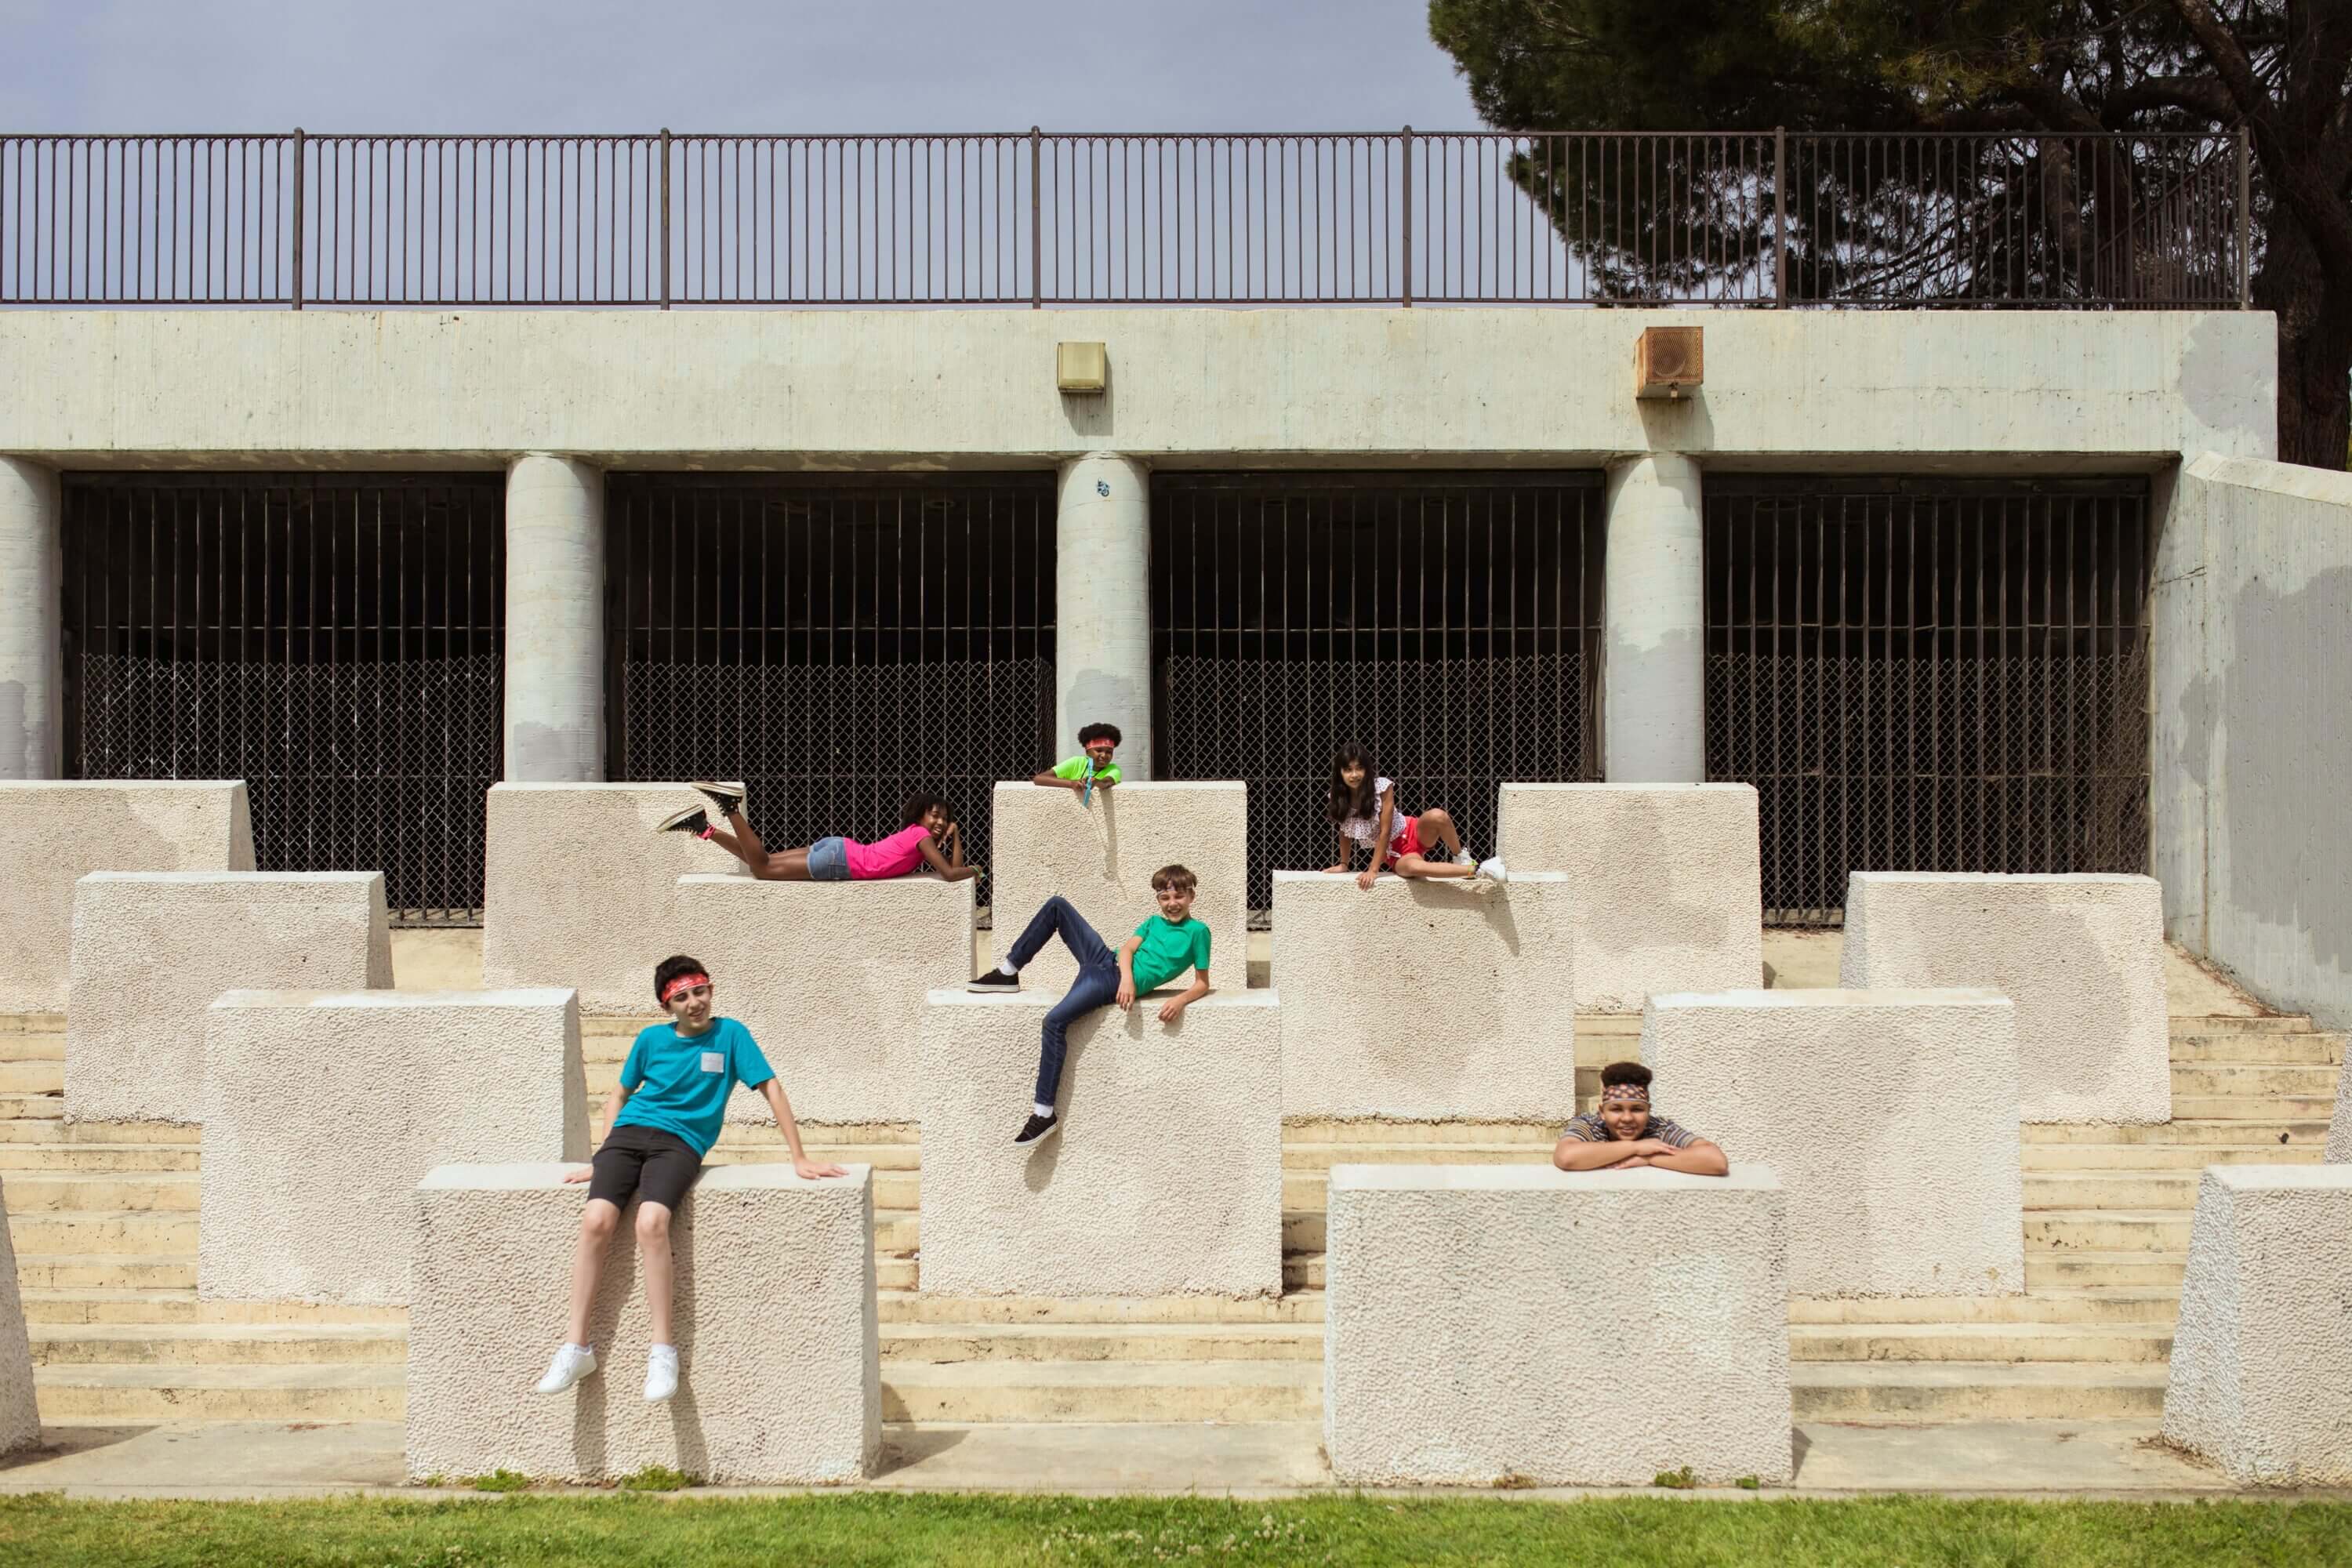 Students pose on large cement blocks while on a field trip